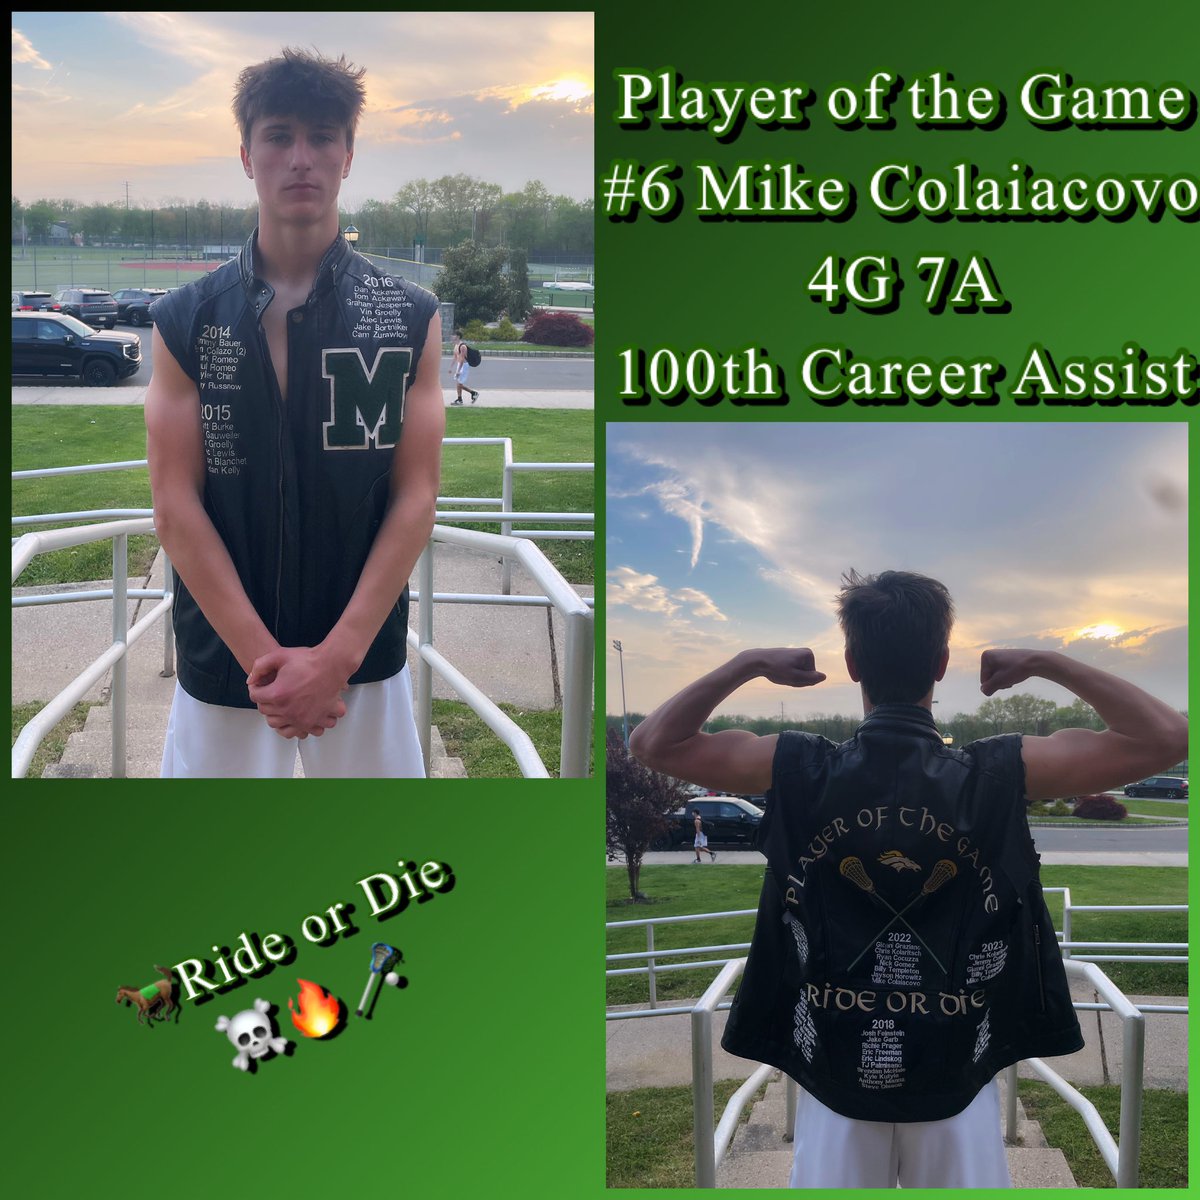 🐎With our victory over Mt. Olive 14-7-#6 Mike Colaiacovo earns “The Vest”and picks up his 100th Career Assist -Let’s Go!!-Ride or Die ☠️🔥🥍 @MustangsMTHS @bigstatesports @MontvilleTAP @dailyrecordspts @MontvilleTwpSch @MTHSStampede @MTHSAthBoosters @MikeKinneyHS @MikeGurnis